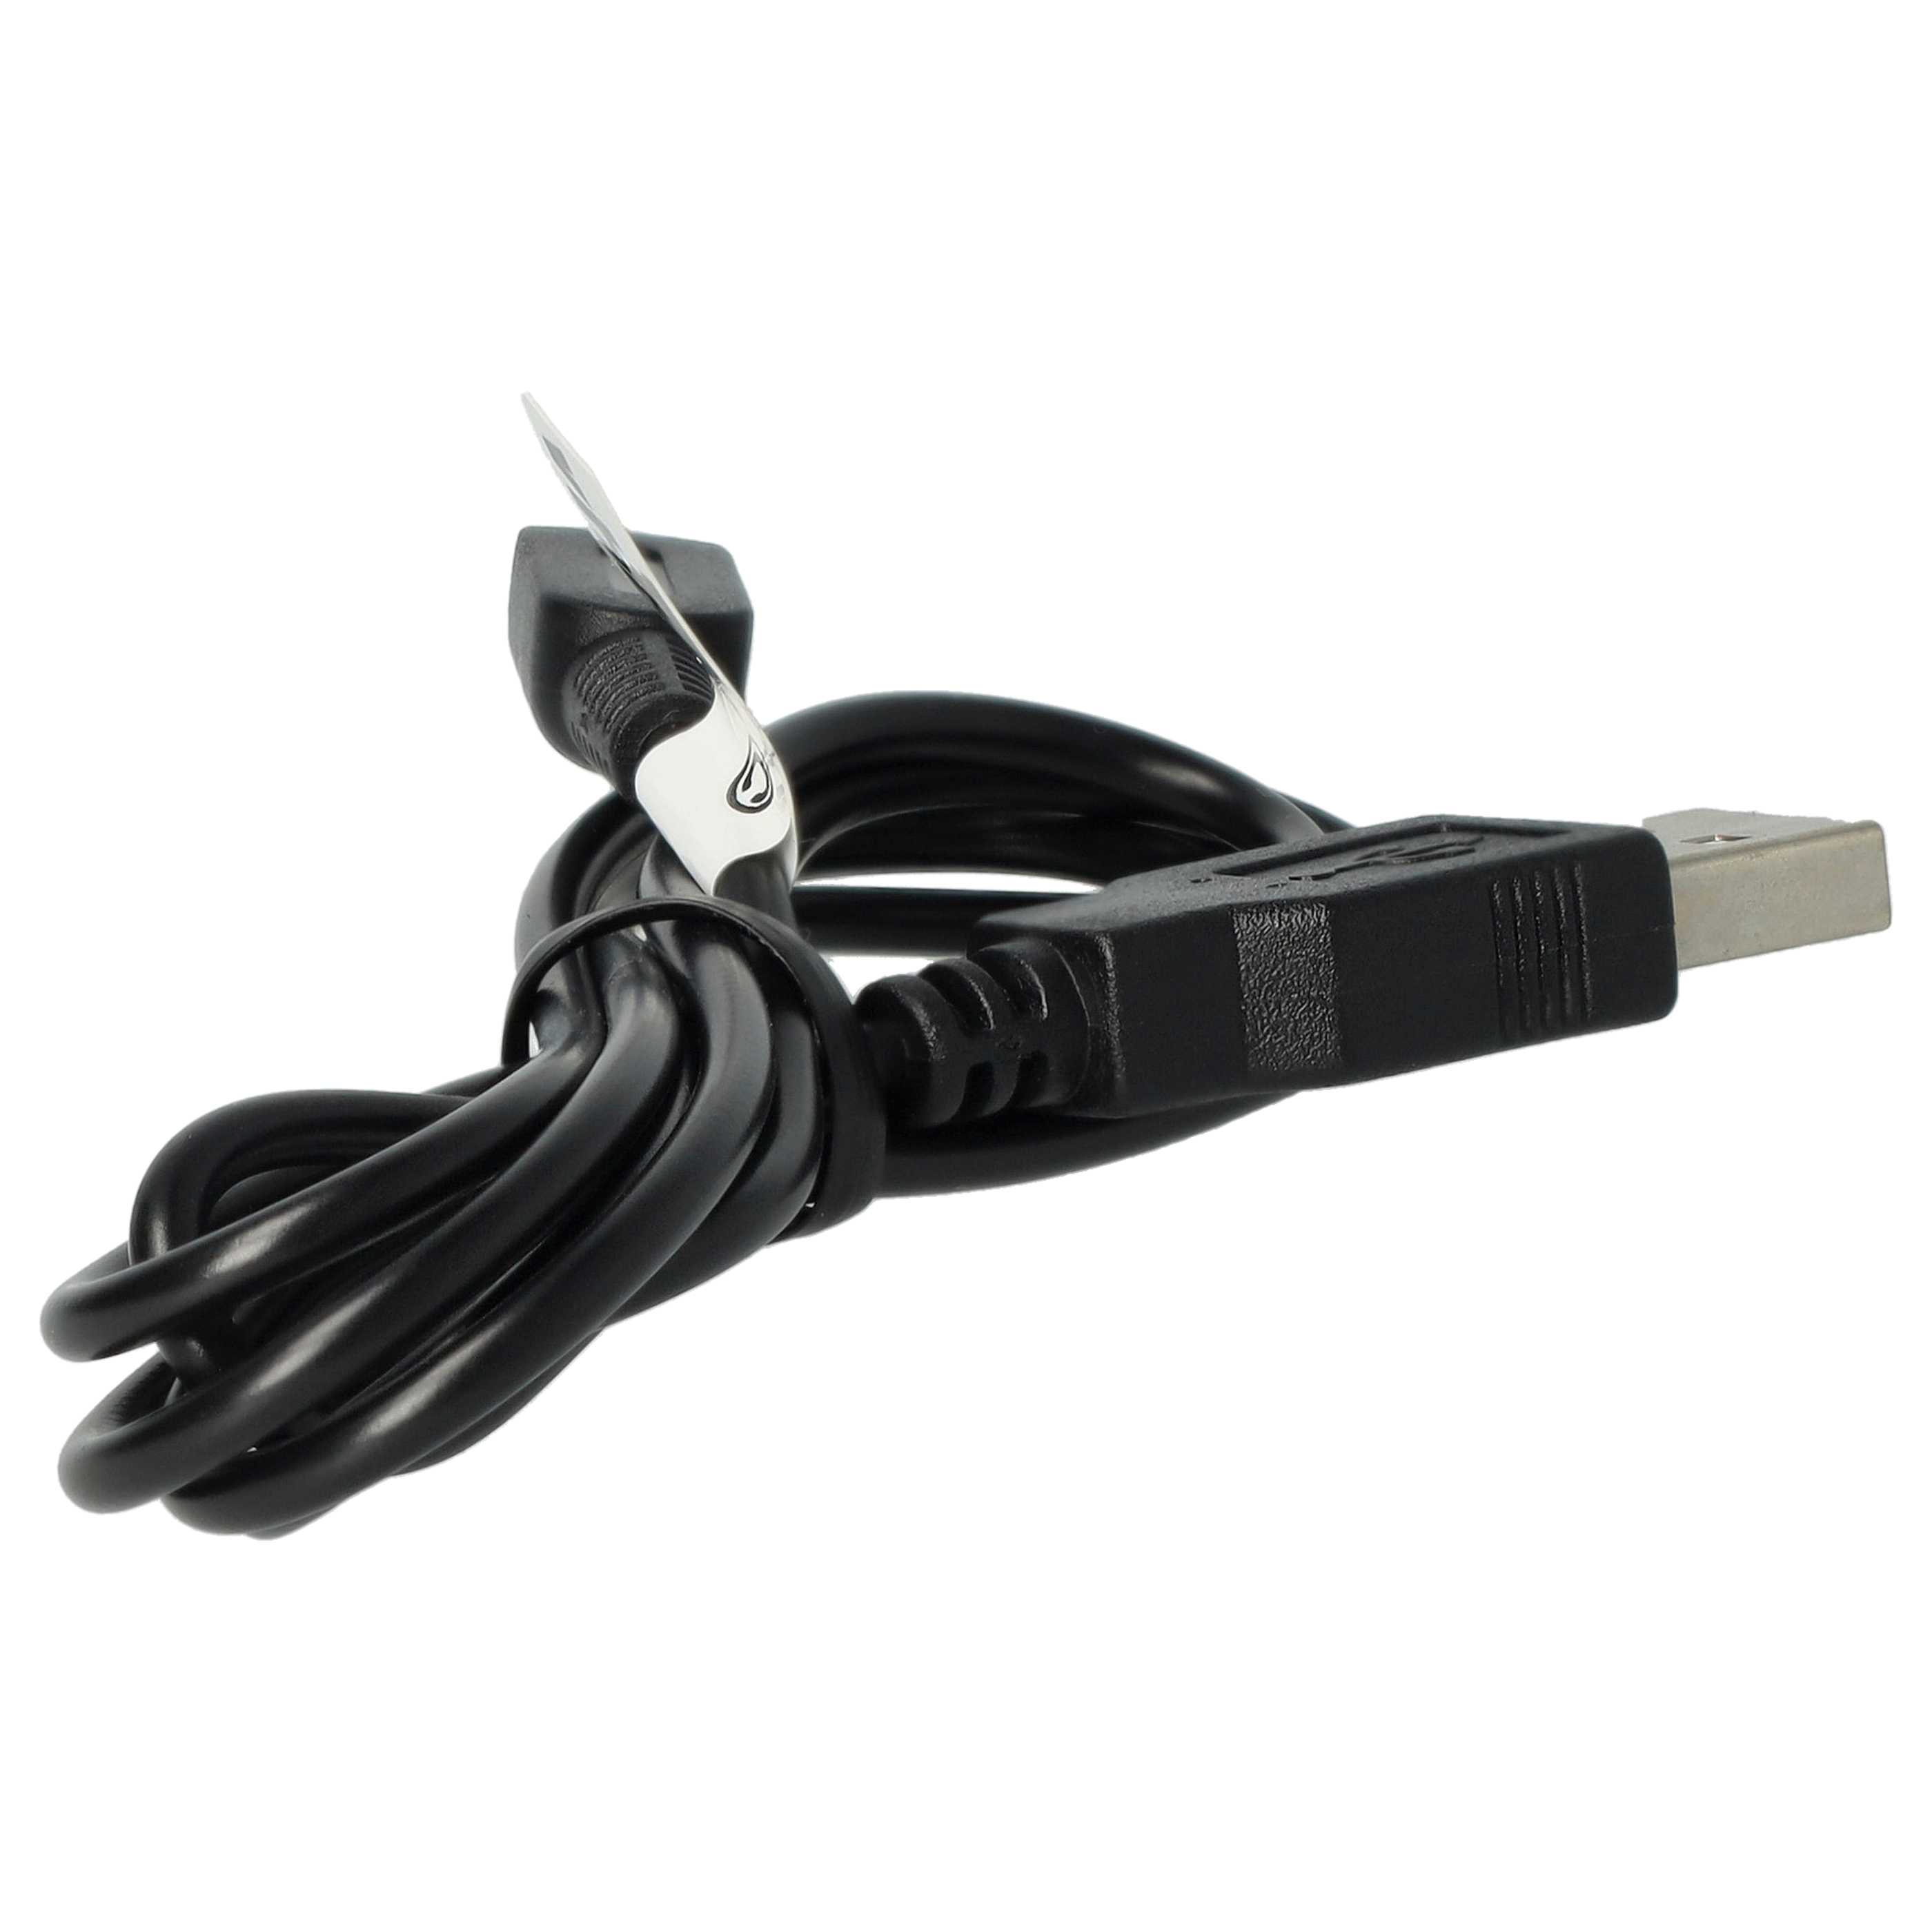 vhbw USB Cable Games Console - Connection Cable 1.2m Long